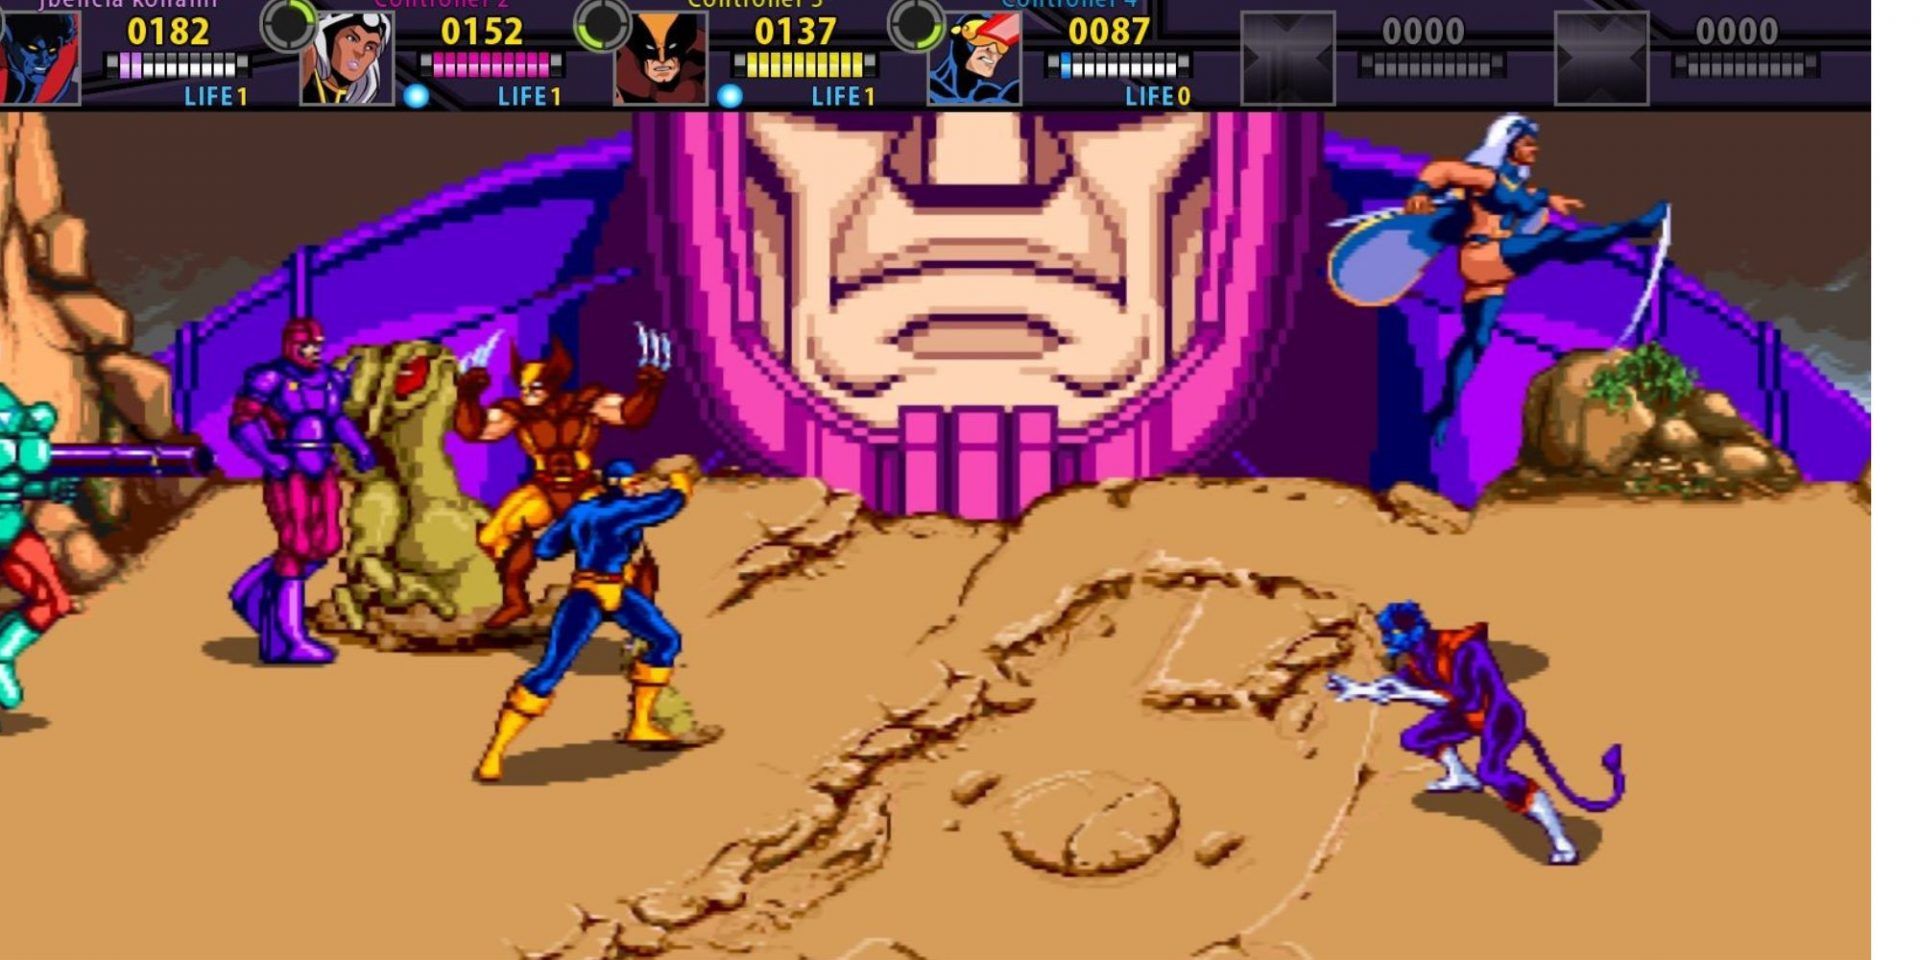 Cyclops, Nightcrawler, Wolverine, and Storm do battle while a Sentinel lurks nearby